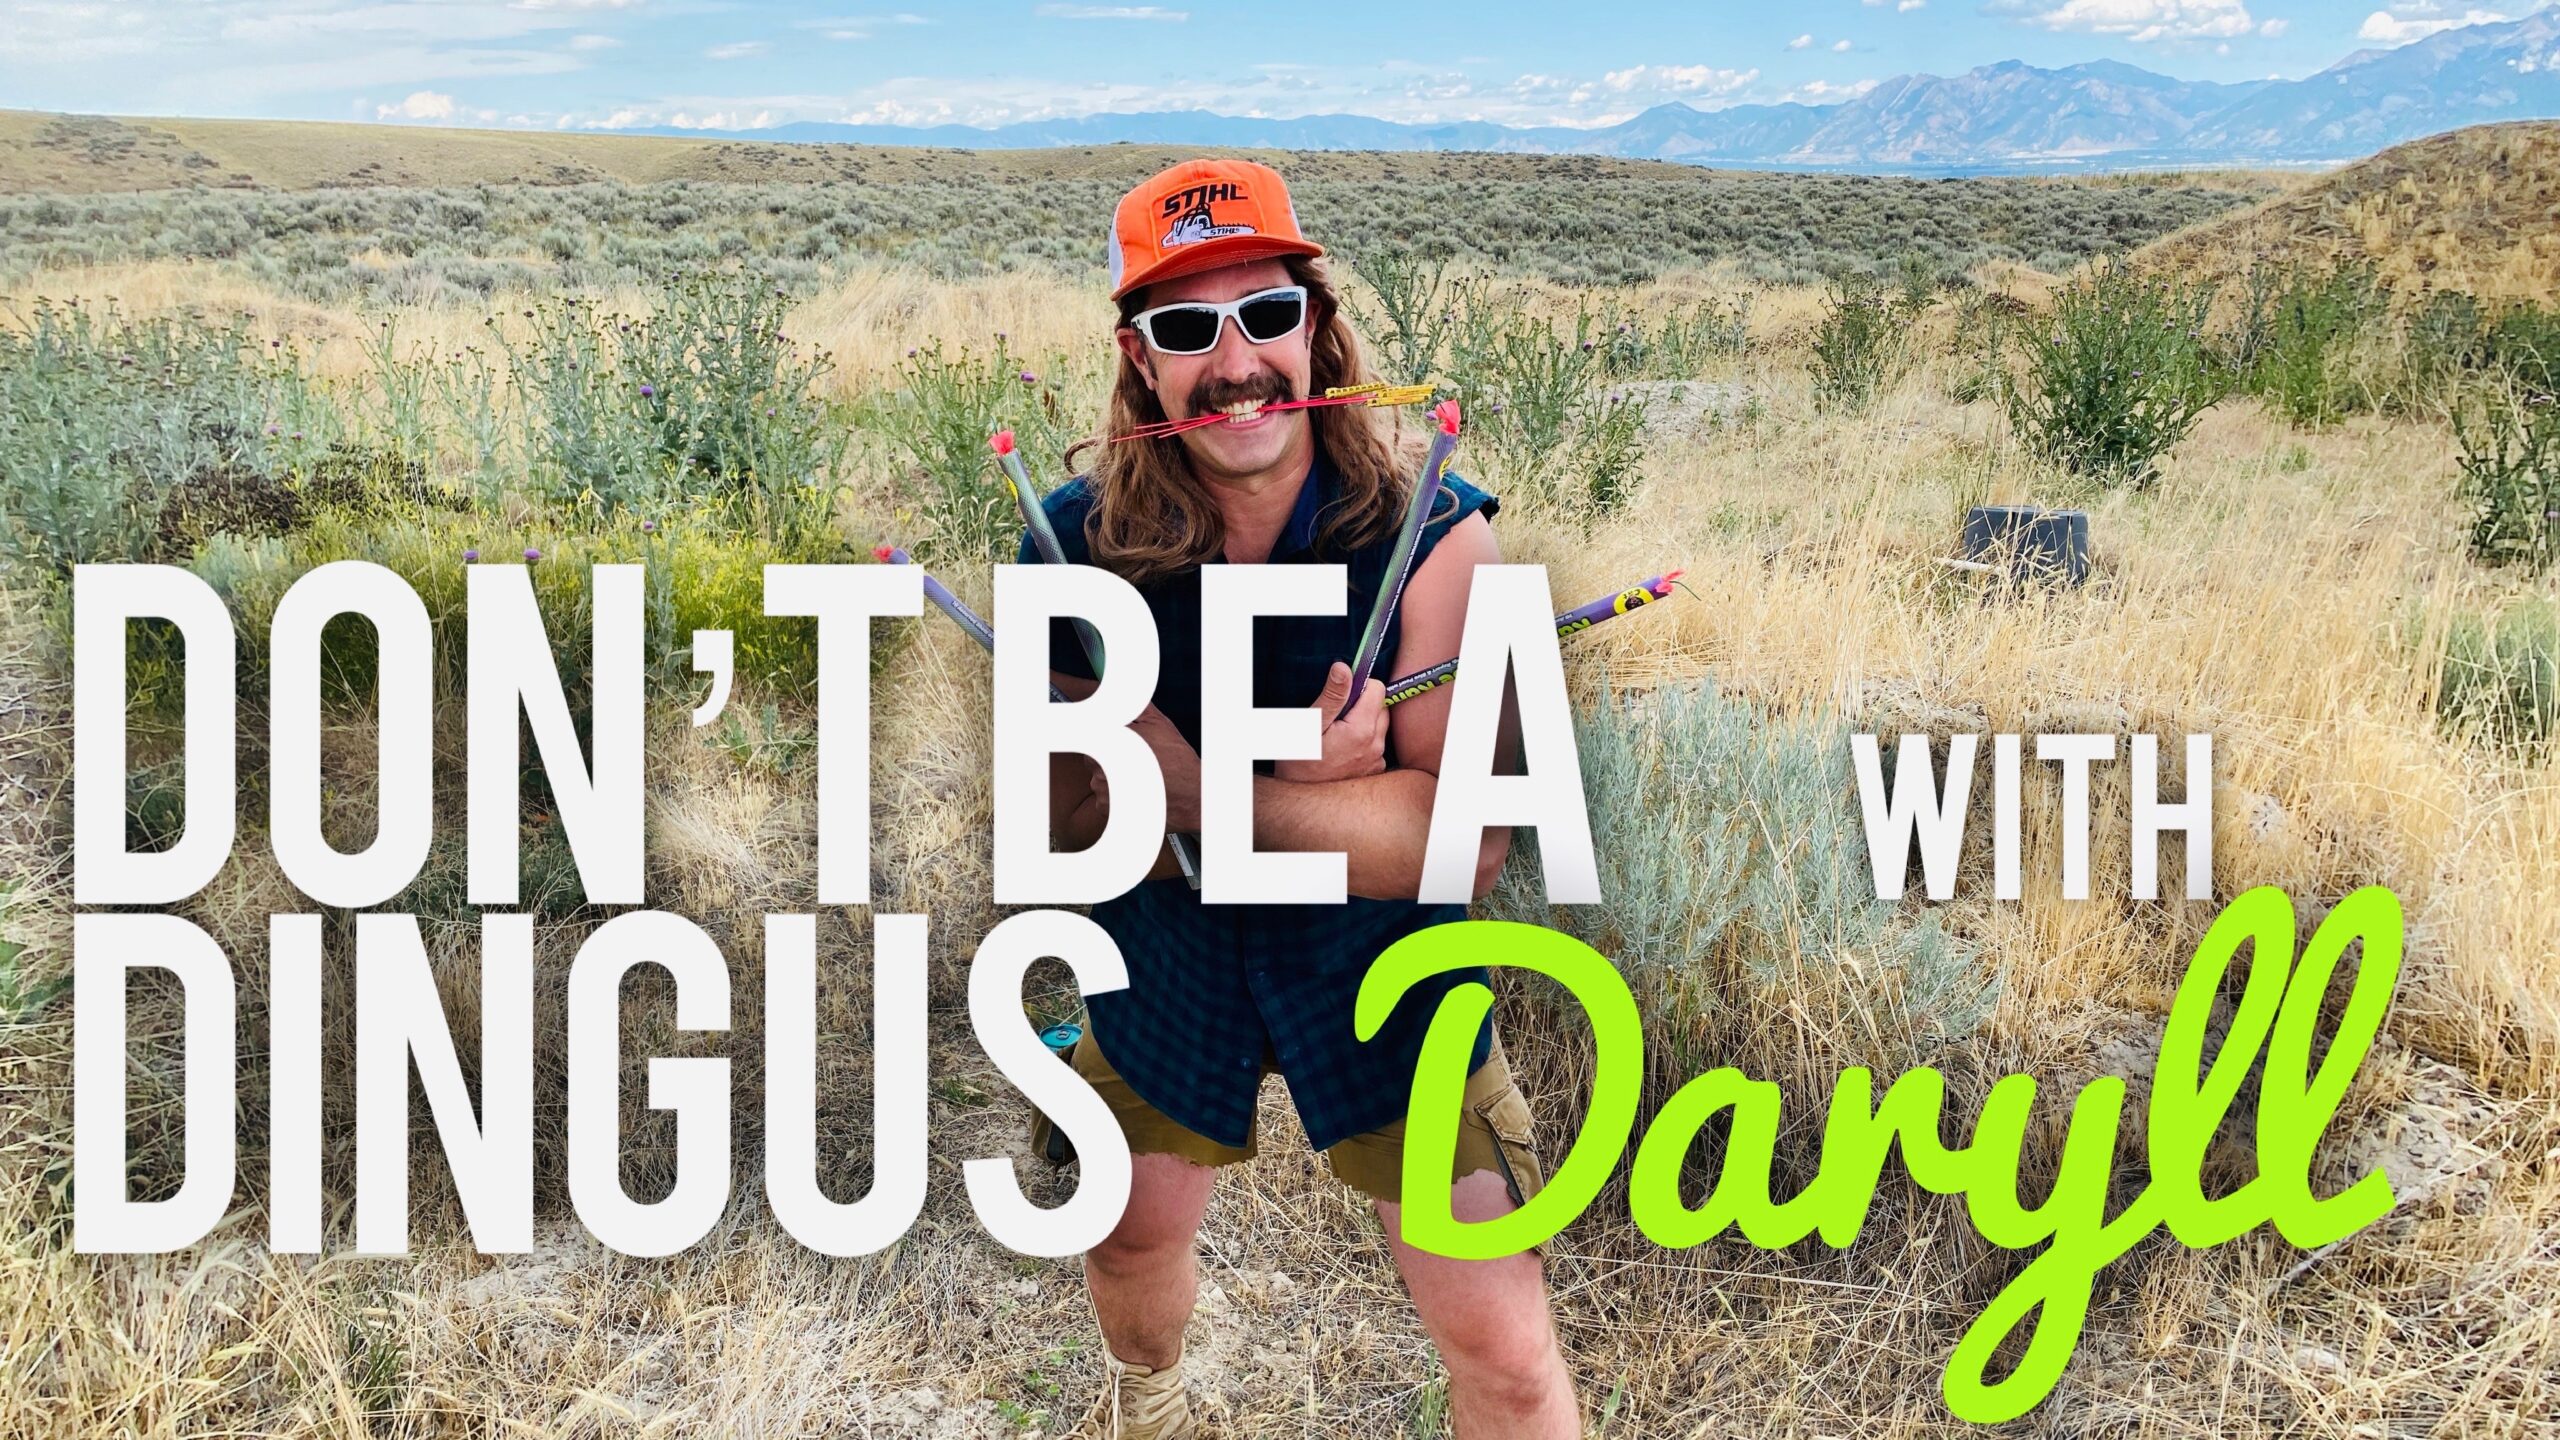 "Don't be a dingus with Daryll"